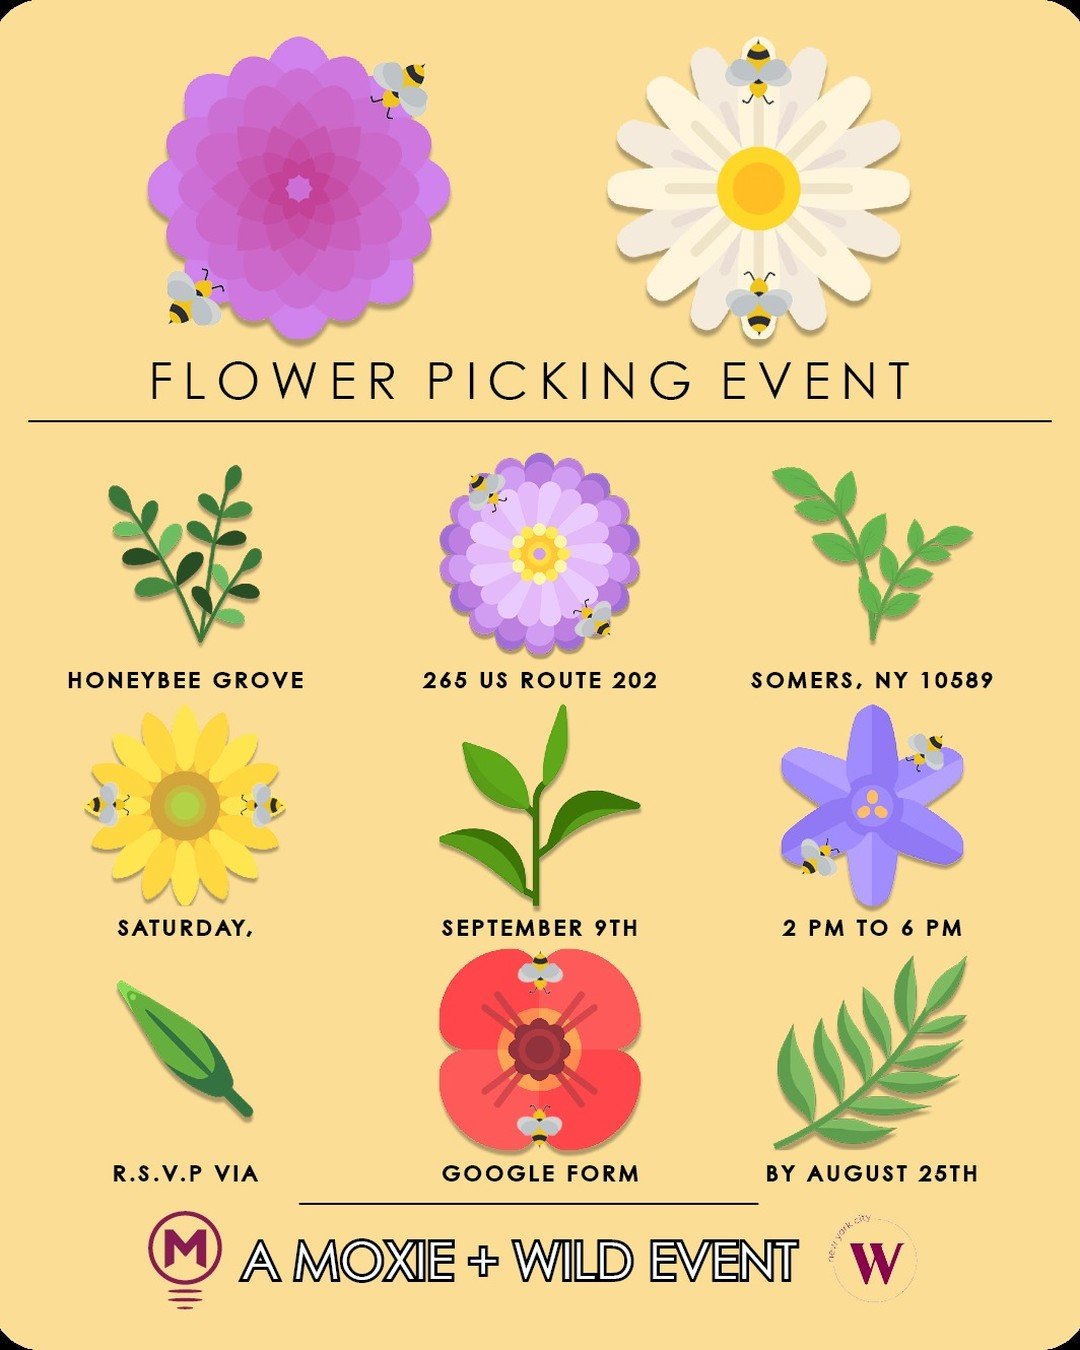 🌻📅 Join us for a delightful flower-picking event at Honeybee Grove Farm on Saturday, September 9th!🌸🍃Discover nature's beauty and create wonderful memories. Don't miss out! RSVP by August 25th via linkin bio! See you there! 🌺🌿#flowerpicking #na